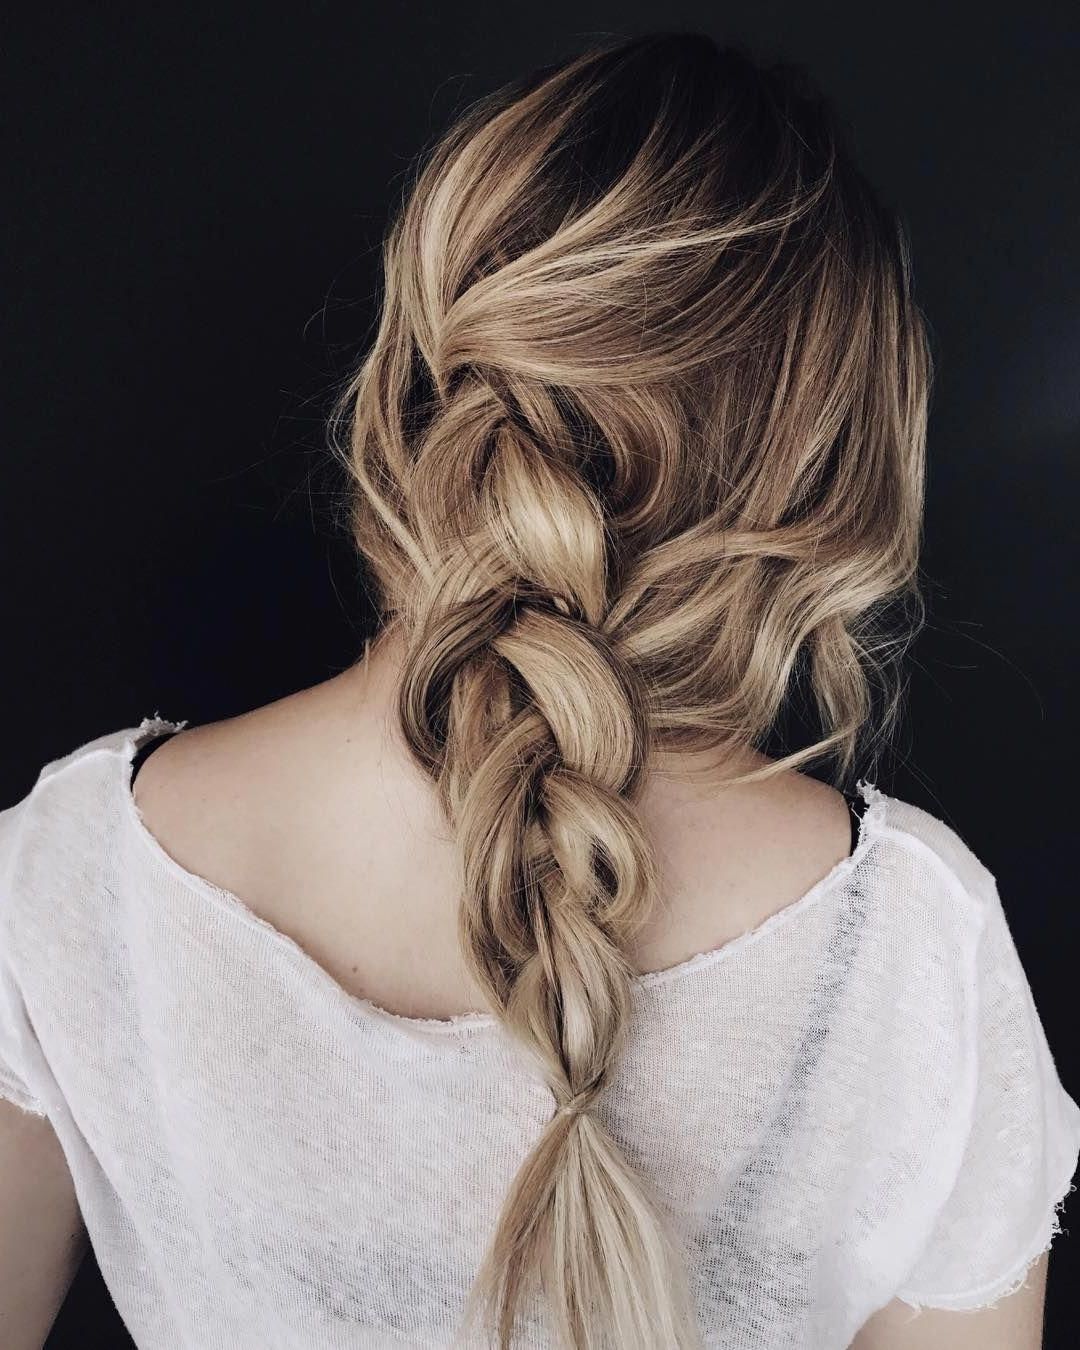 8 Messy, Easy Braid Ideas To Copy – Best Braided Within 2019 Messy Twisted Braid Hairstyles (View 1 of 20)